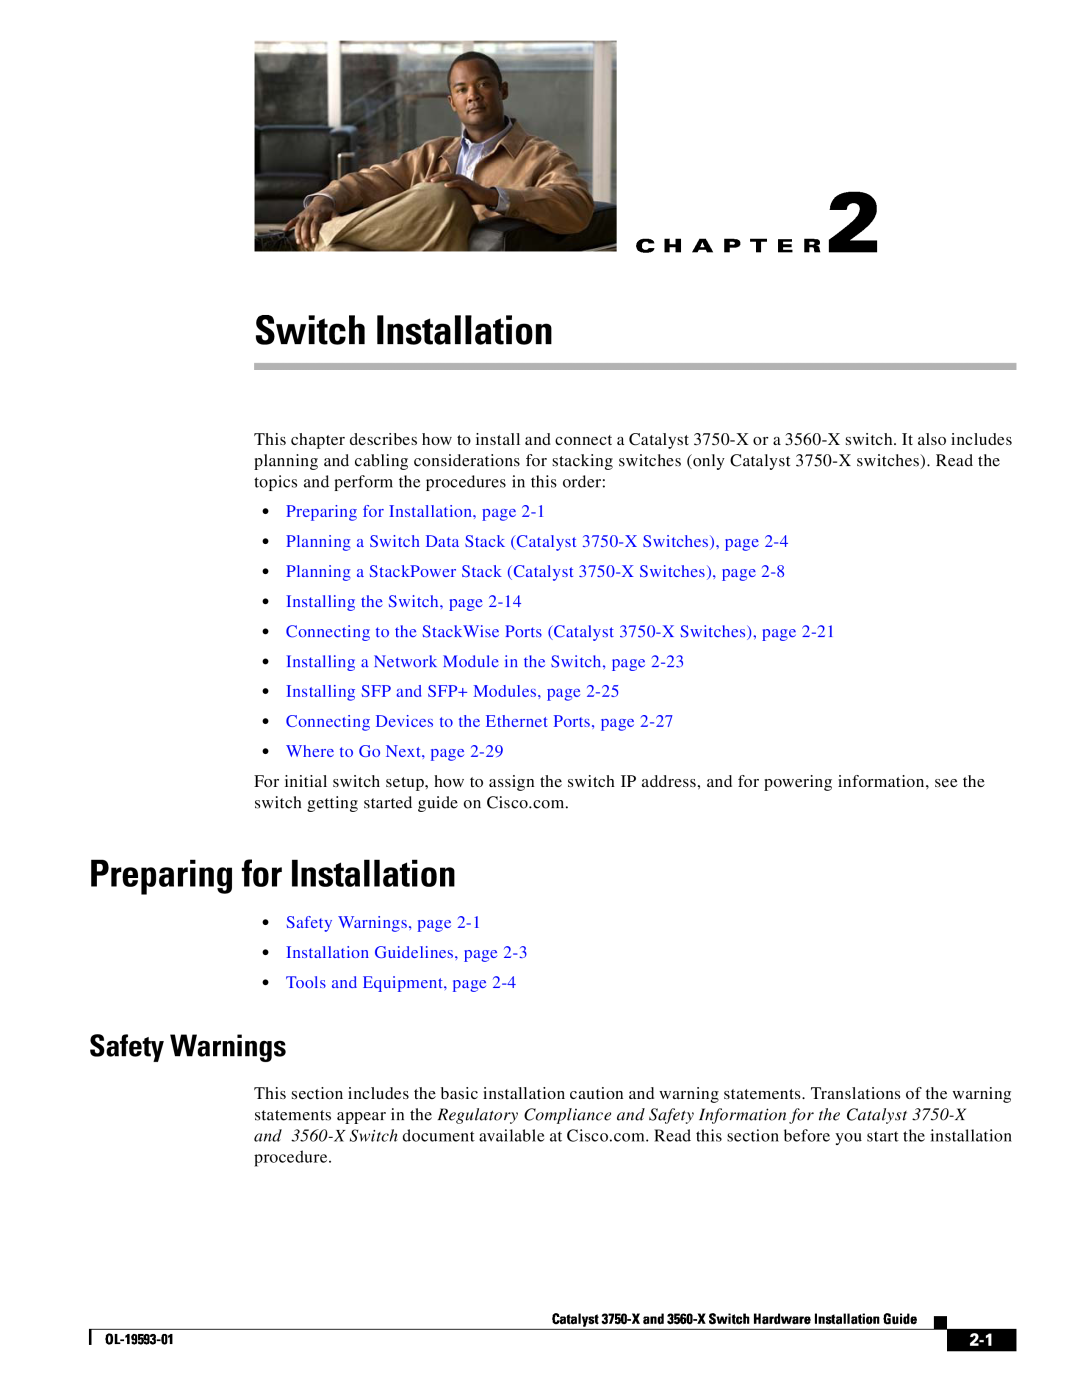 Cisco Systems 3560-X Switch Installation, Safety Warnings, Preparing for Installation, page, Tools and Equipment, page 